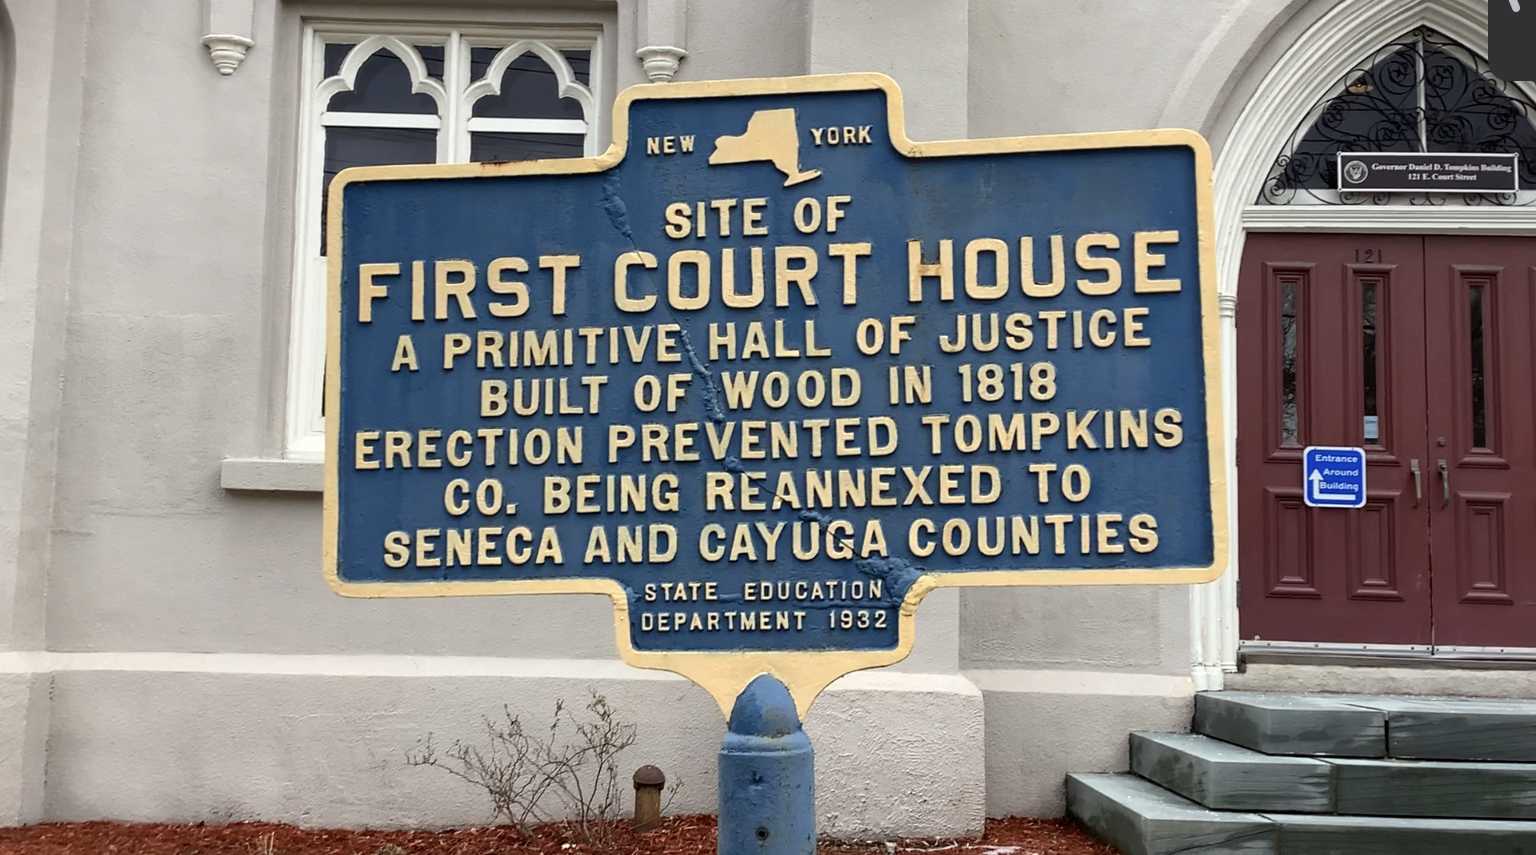 The site of the first court house is important to earlier moments in Ithaca's LGBT history such as the early 2000's move for same-sex marriage and adoptions for same-sex couples.